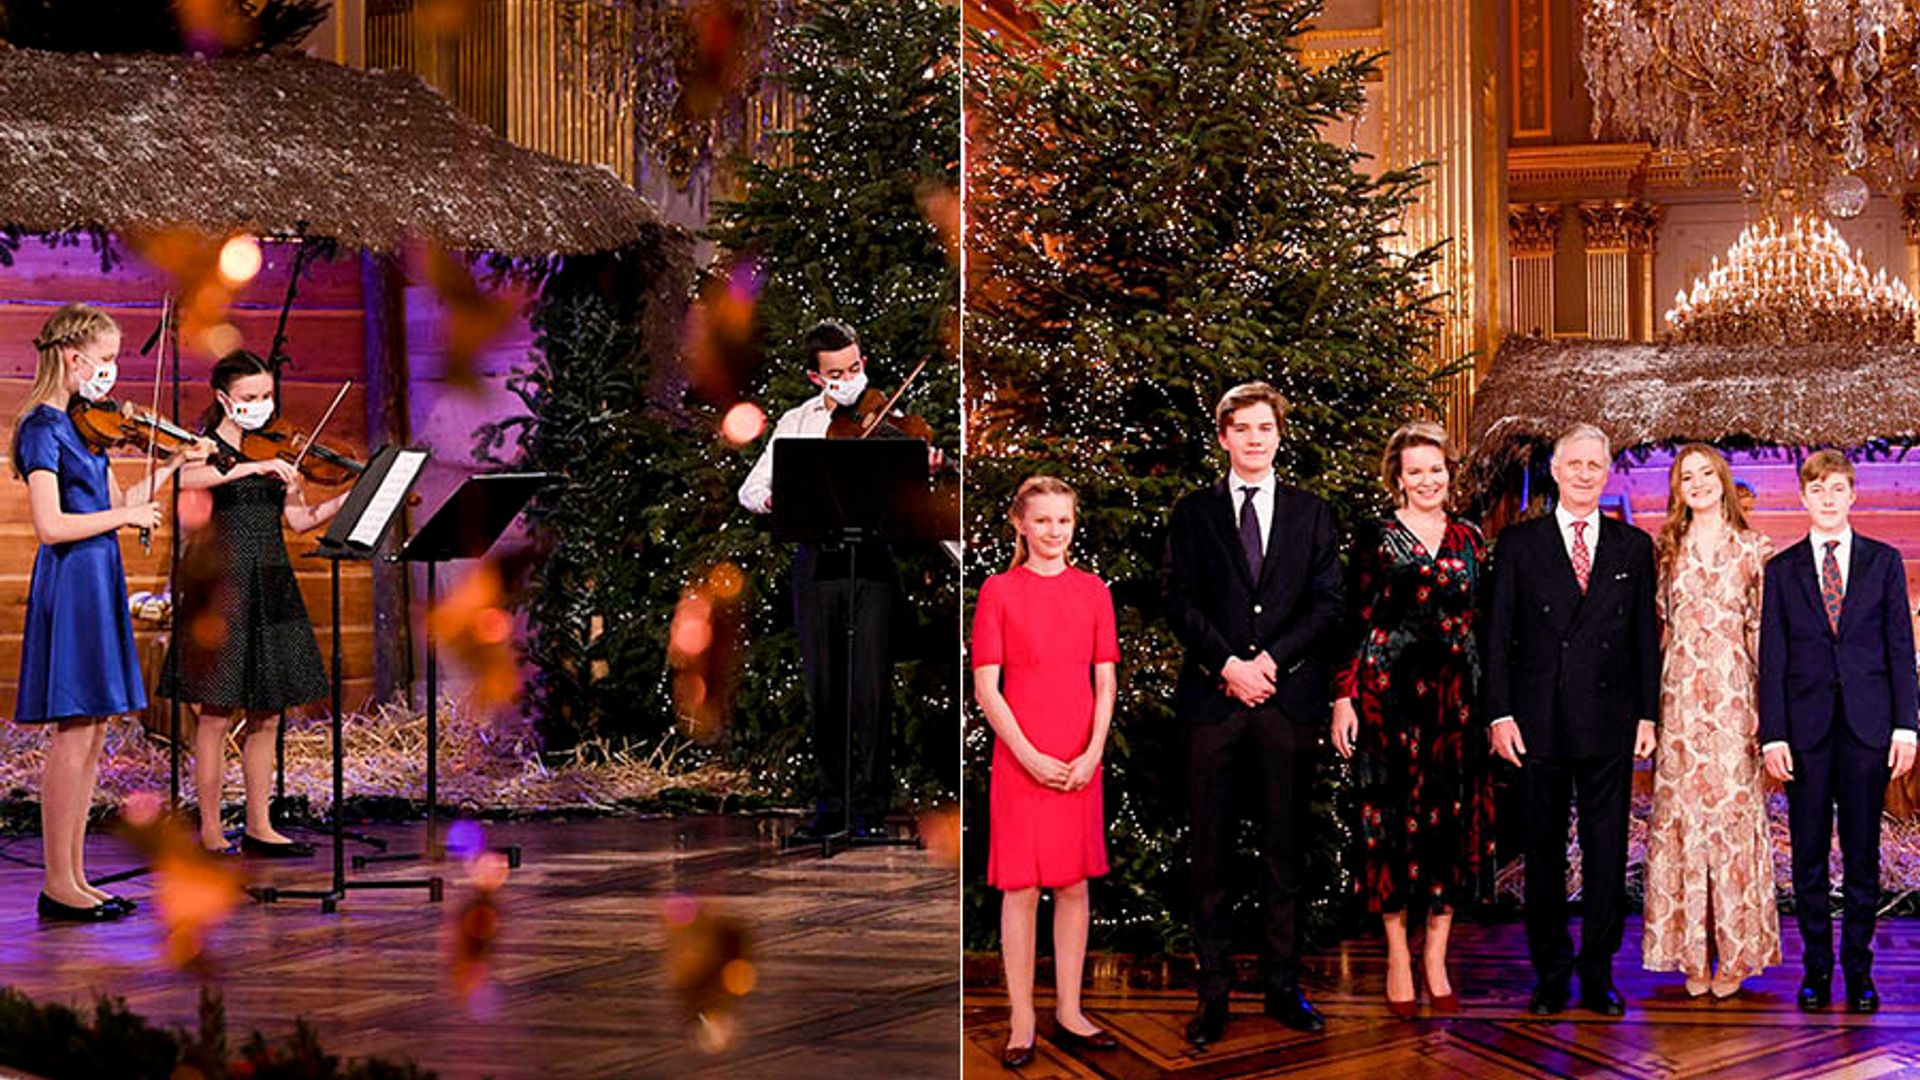 The Belgian royals reveal their incredible Christmas decorations during a concert at the royal palace